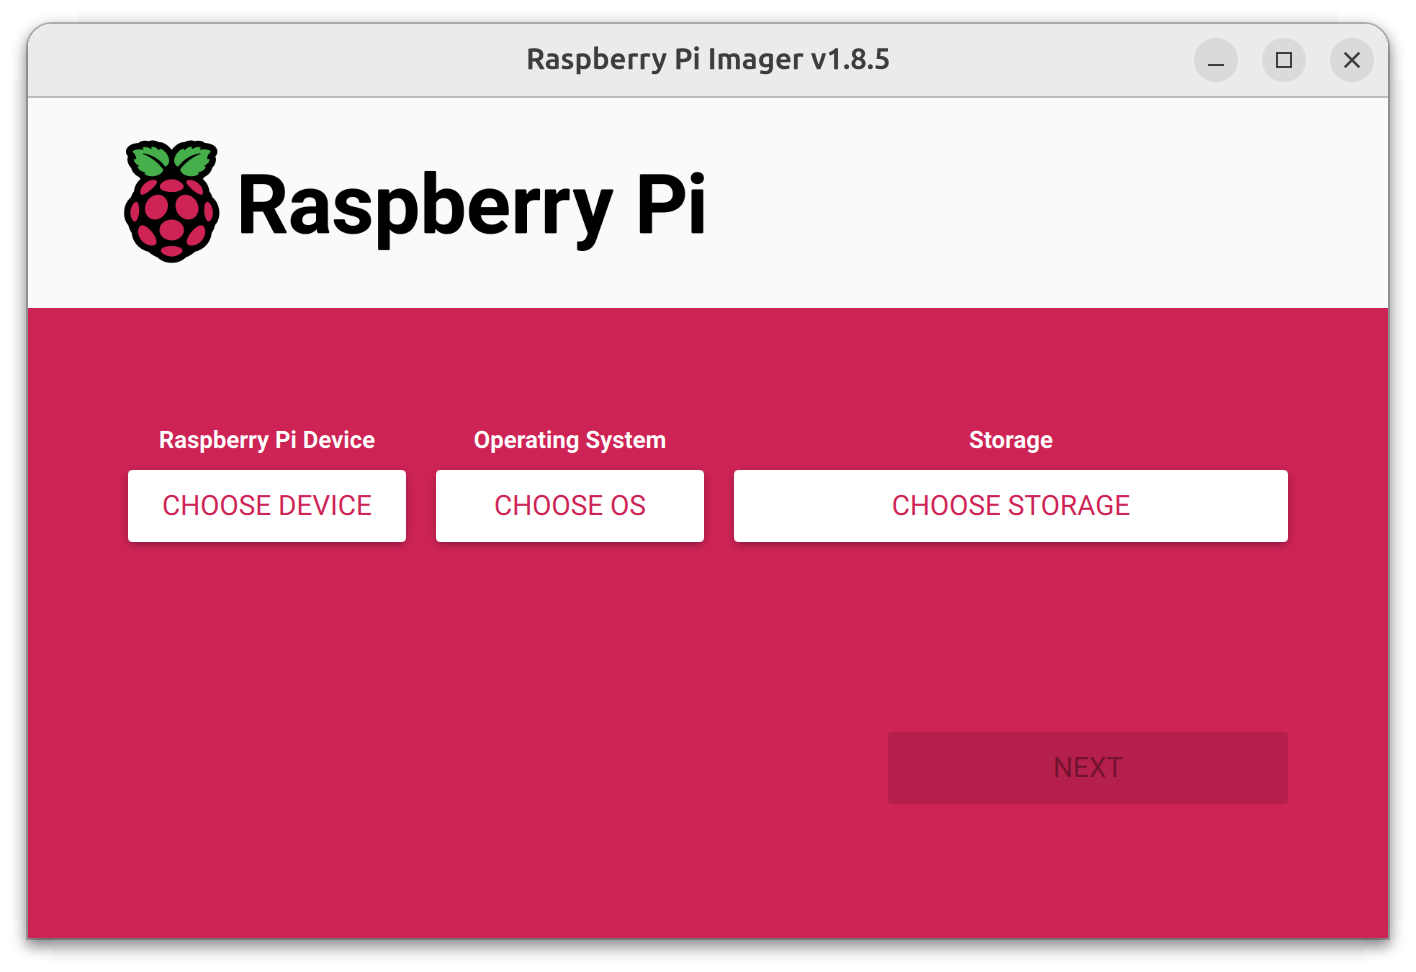 Screenshot of the Raspberry Pi Imager, with three buttons letting you choose the Raspberry Pi device, operating system and storage where to write the image